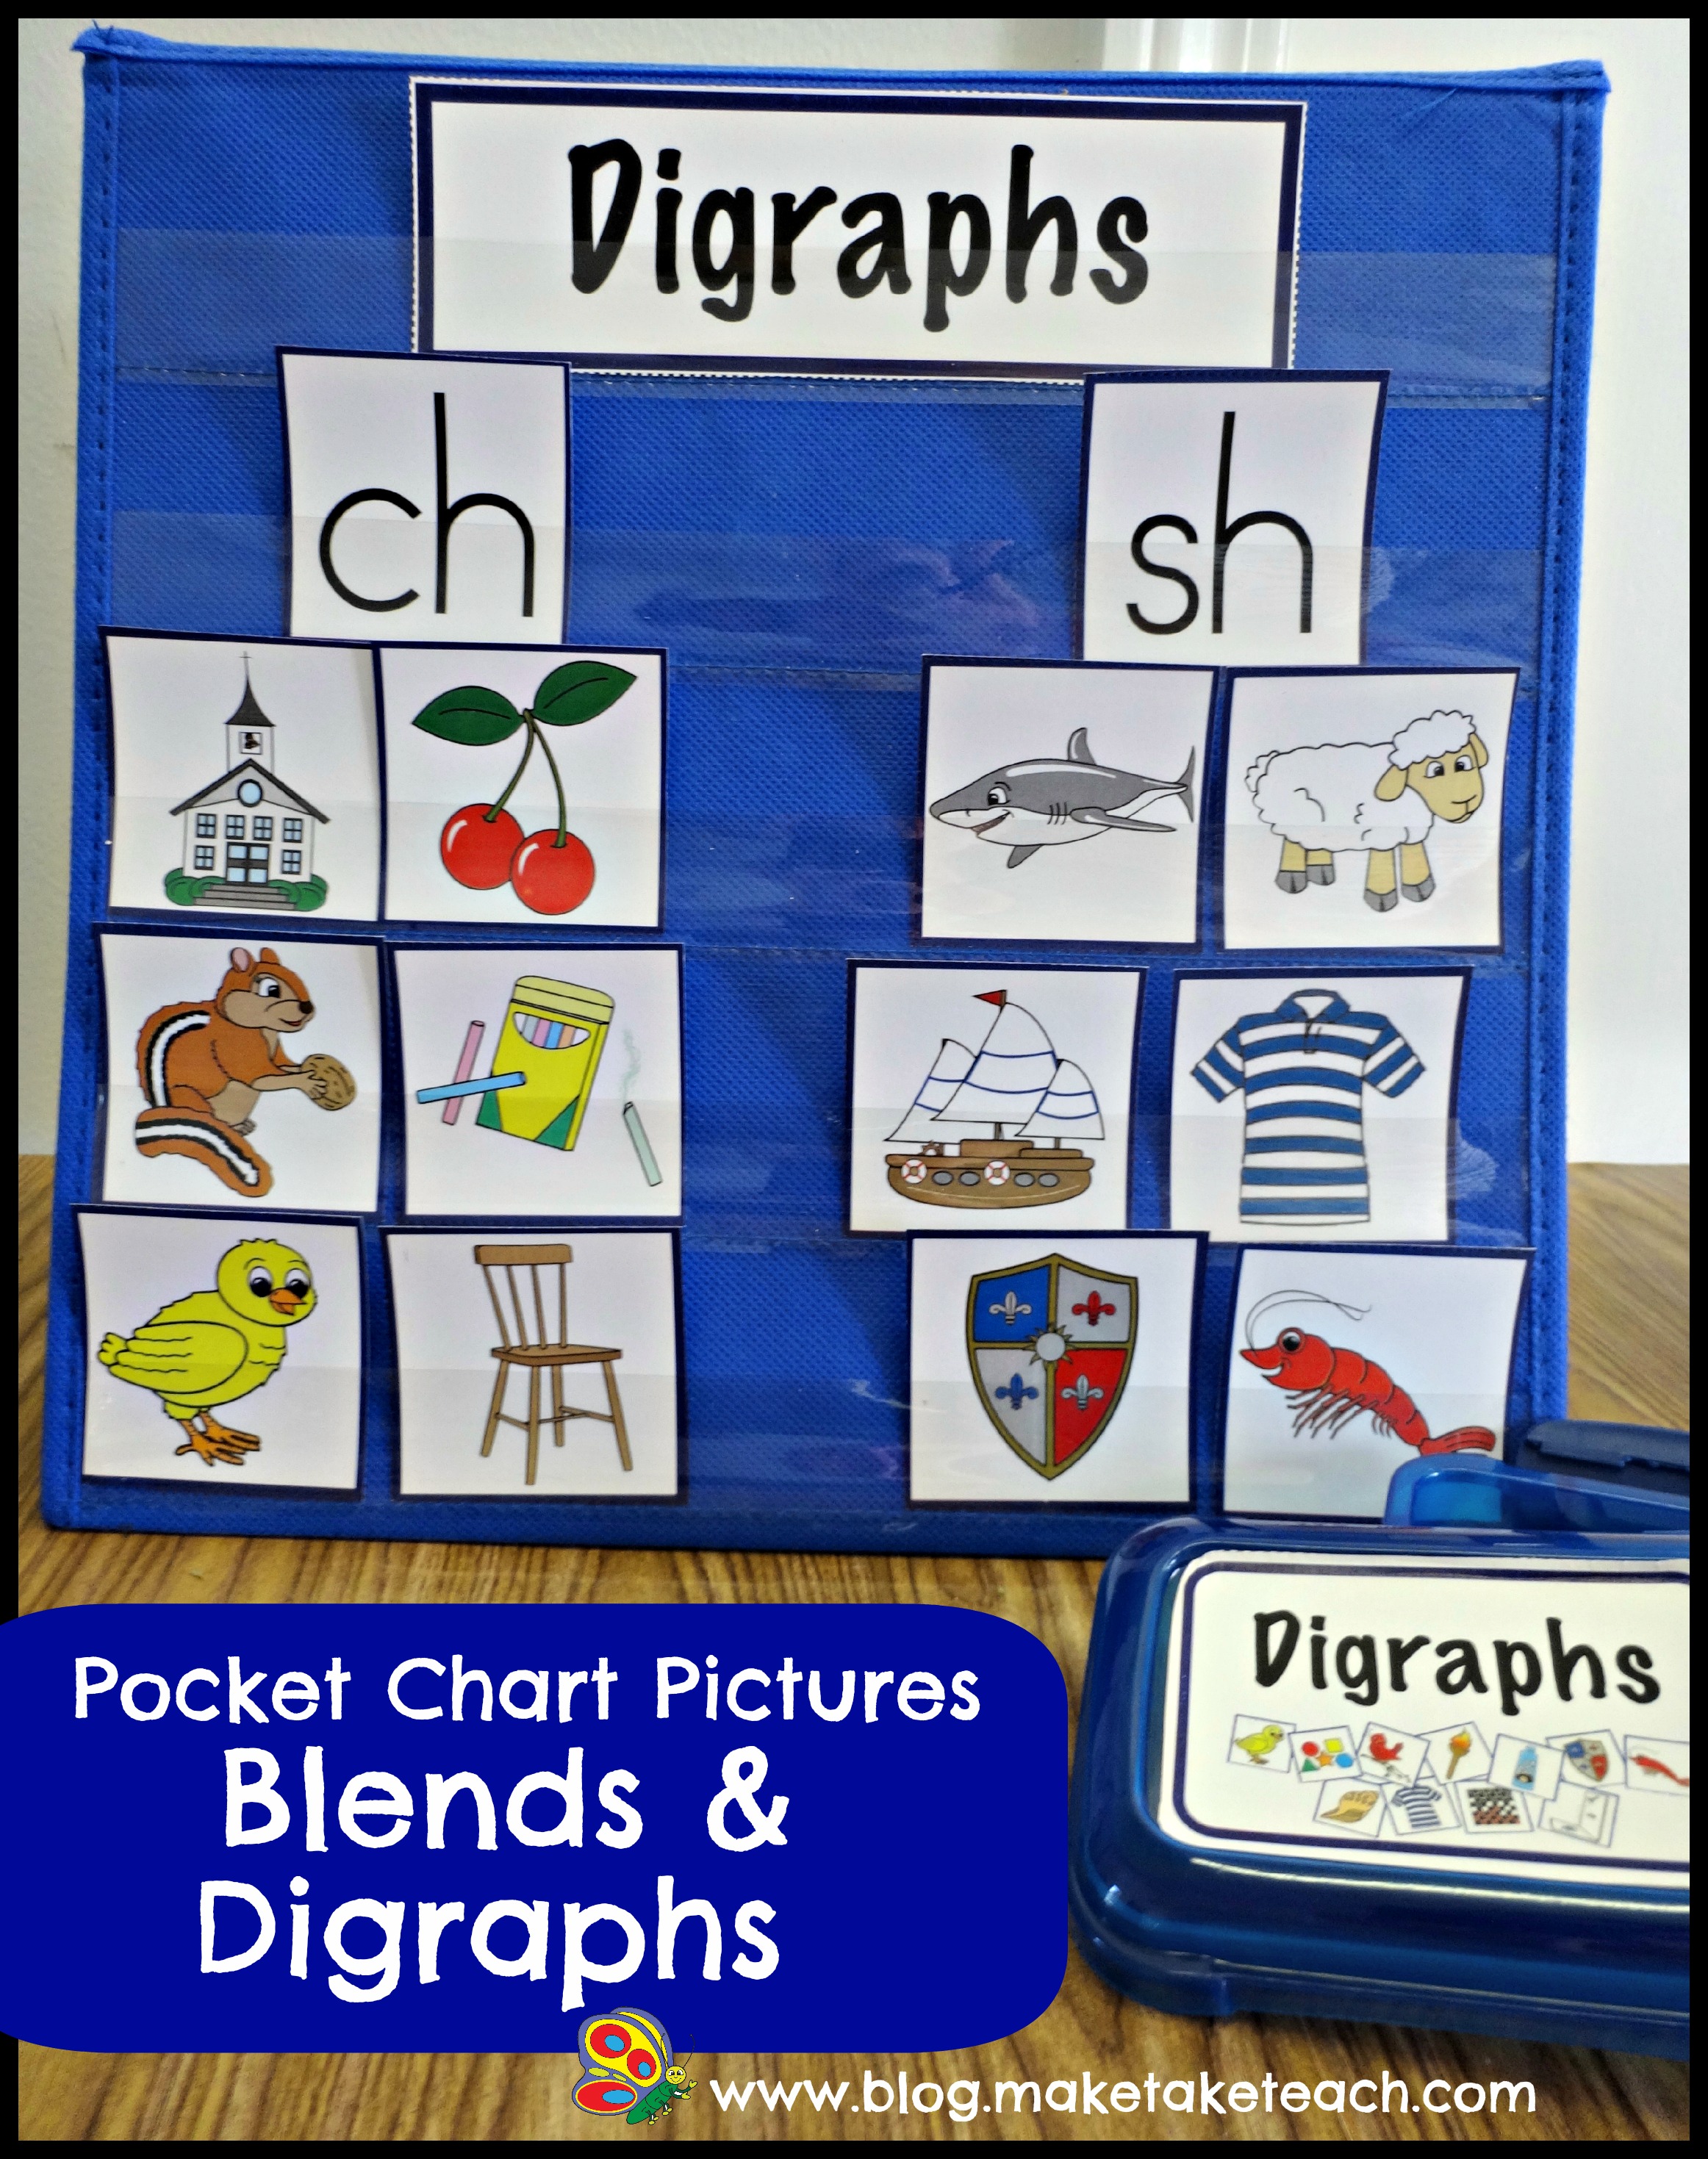 Even MORE Pocket Chart Pictures! Make Take & Teach